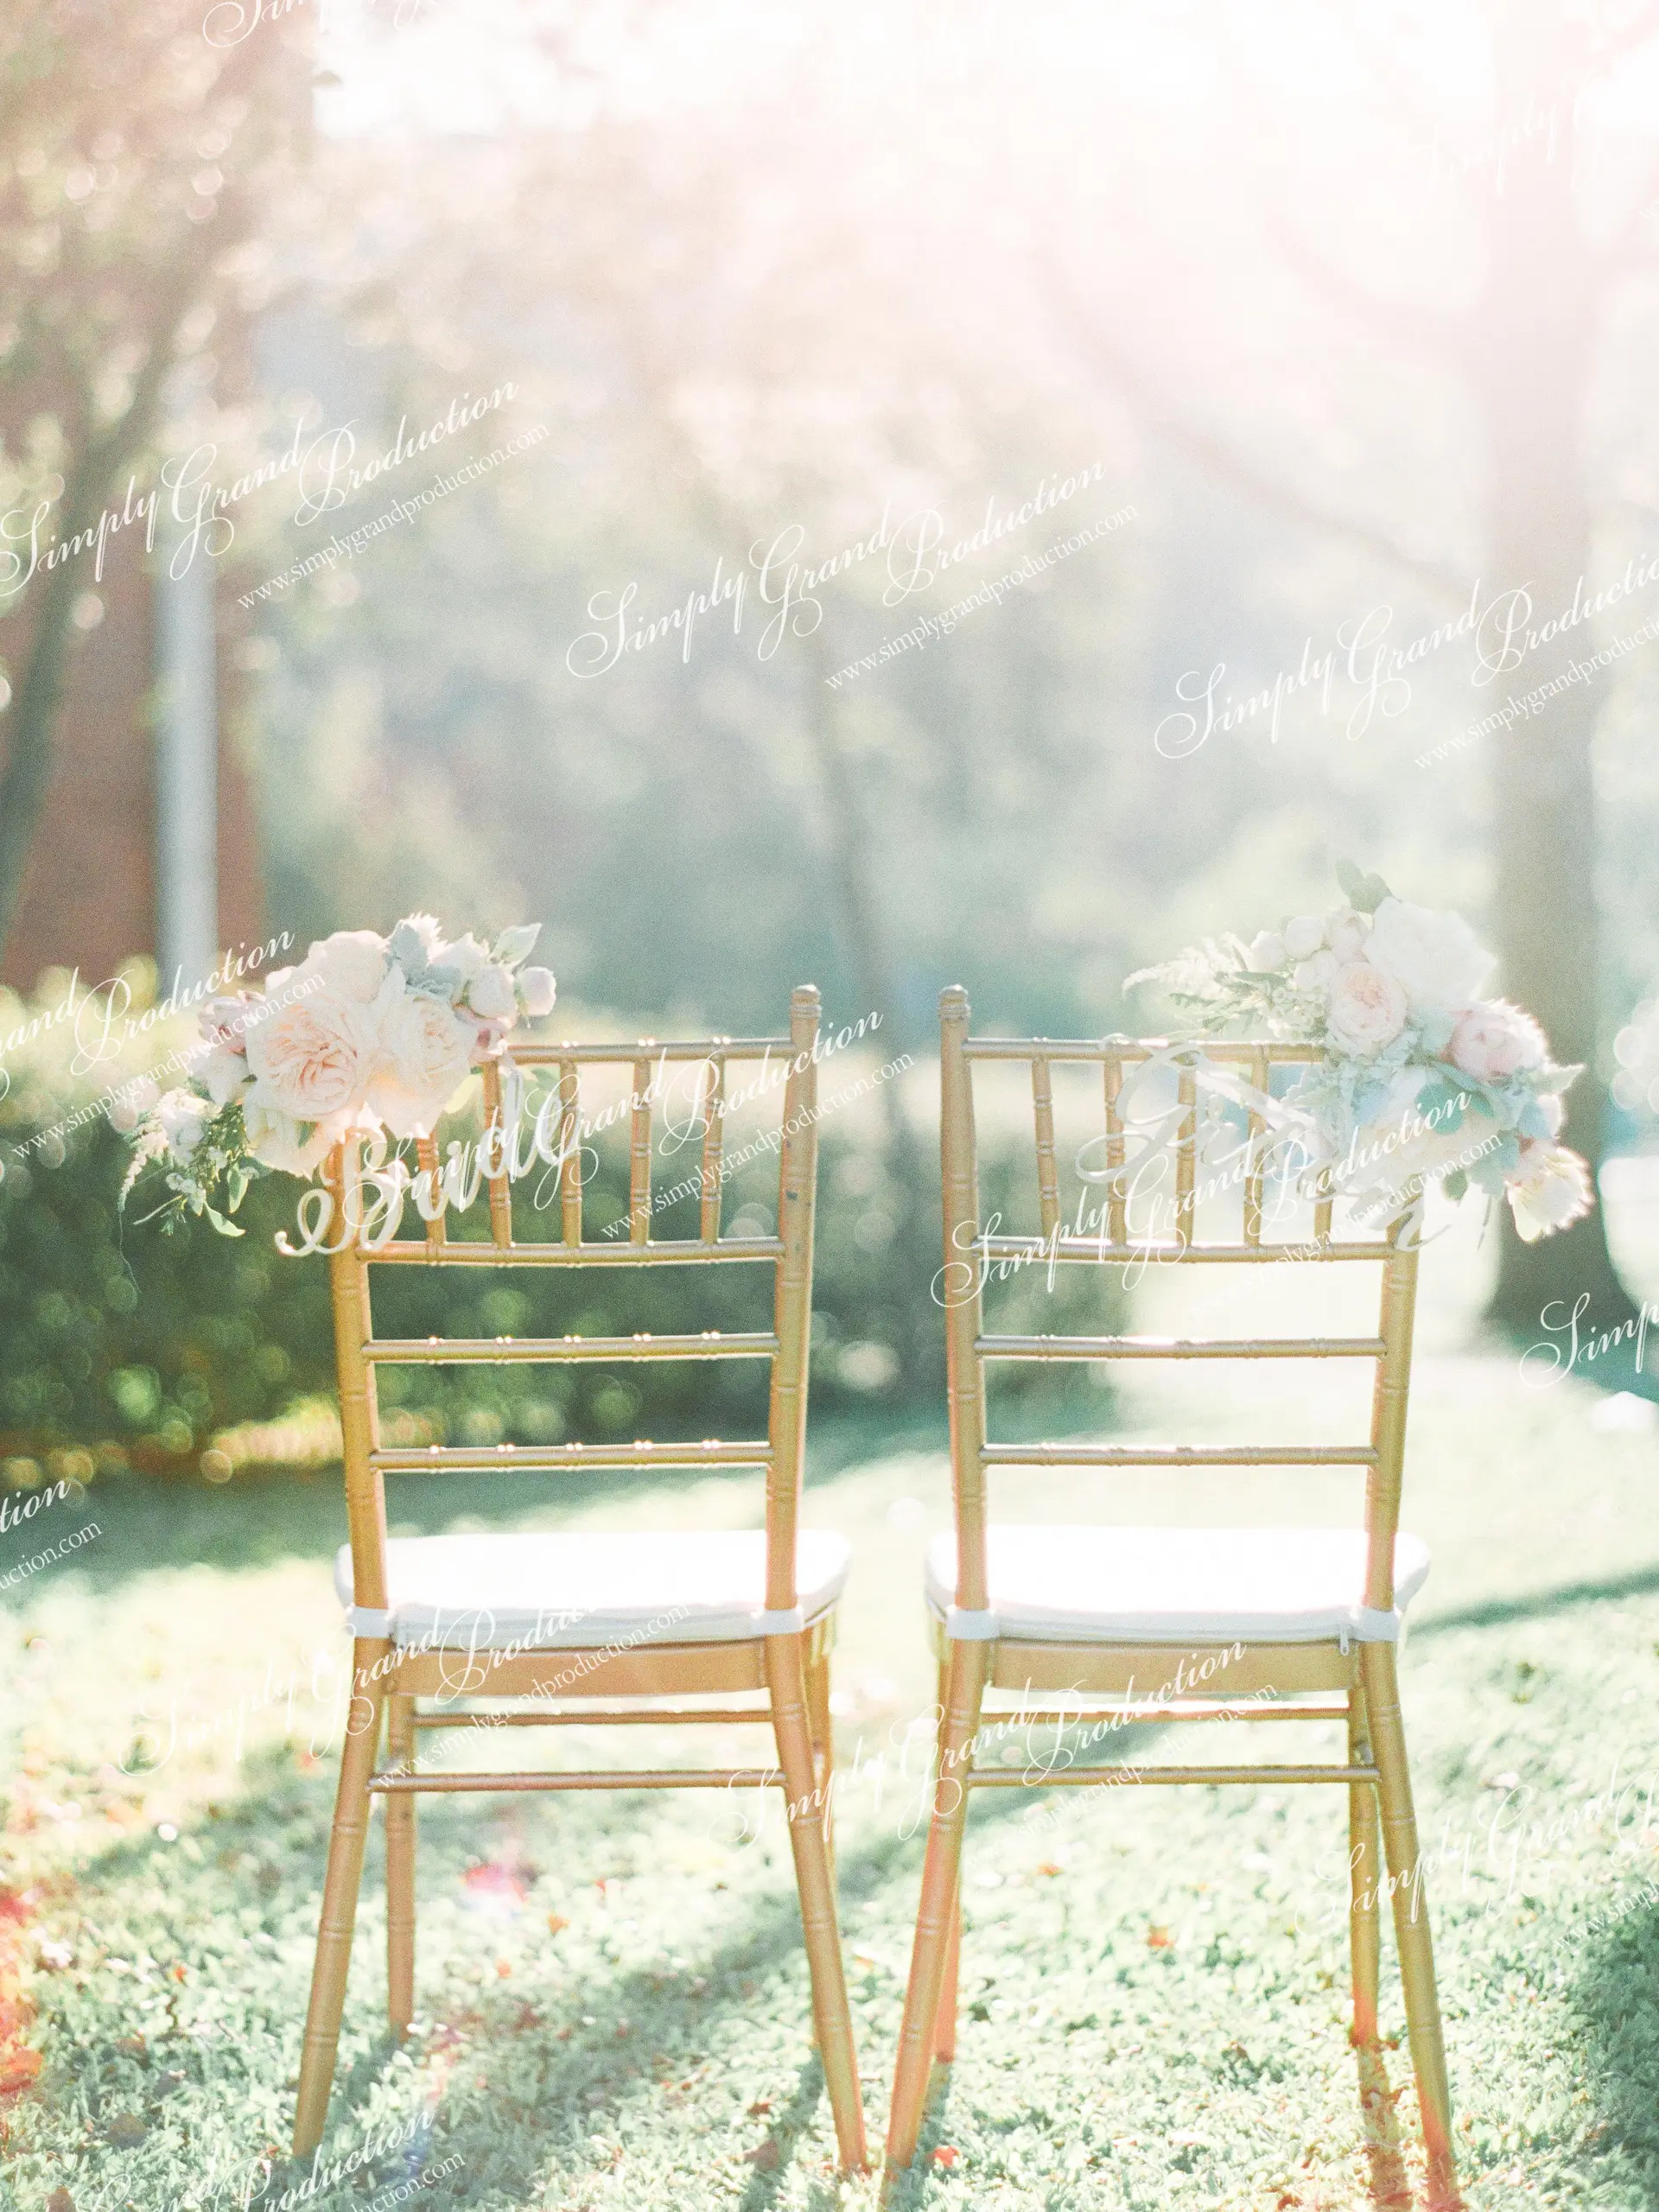 Simply_Grand_Production_Outdoor_wedding_decoration_photoshoot_Adventist_College_chair_flower_2_4.jpg